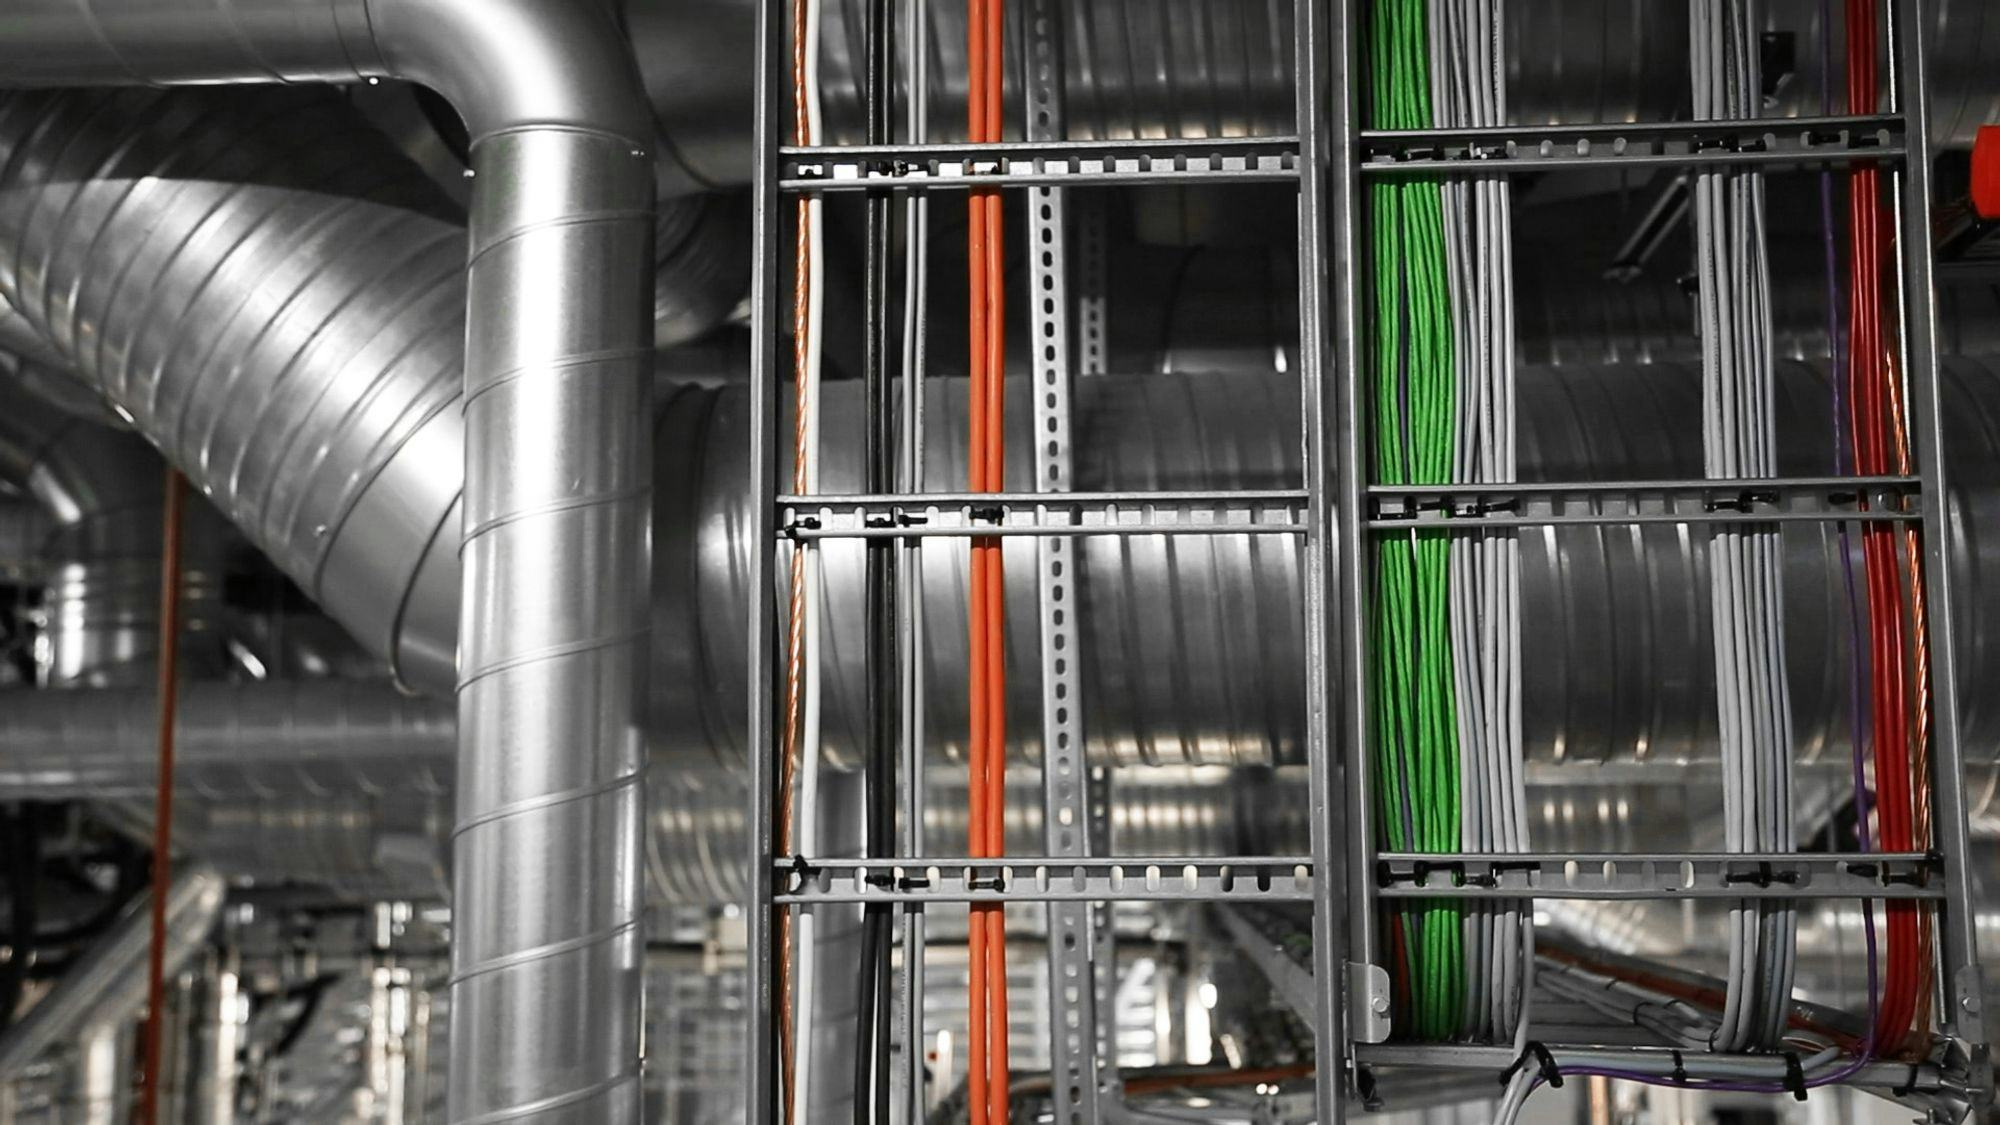 Ventilation system in the background and electrical cables in orange, green, green and red colors on a frame in the foreground